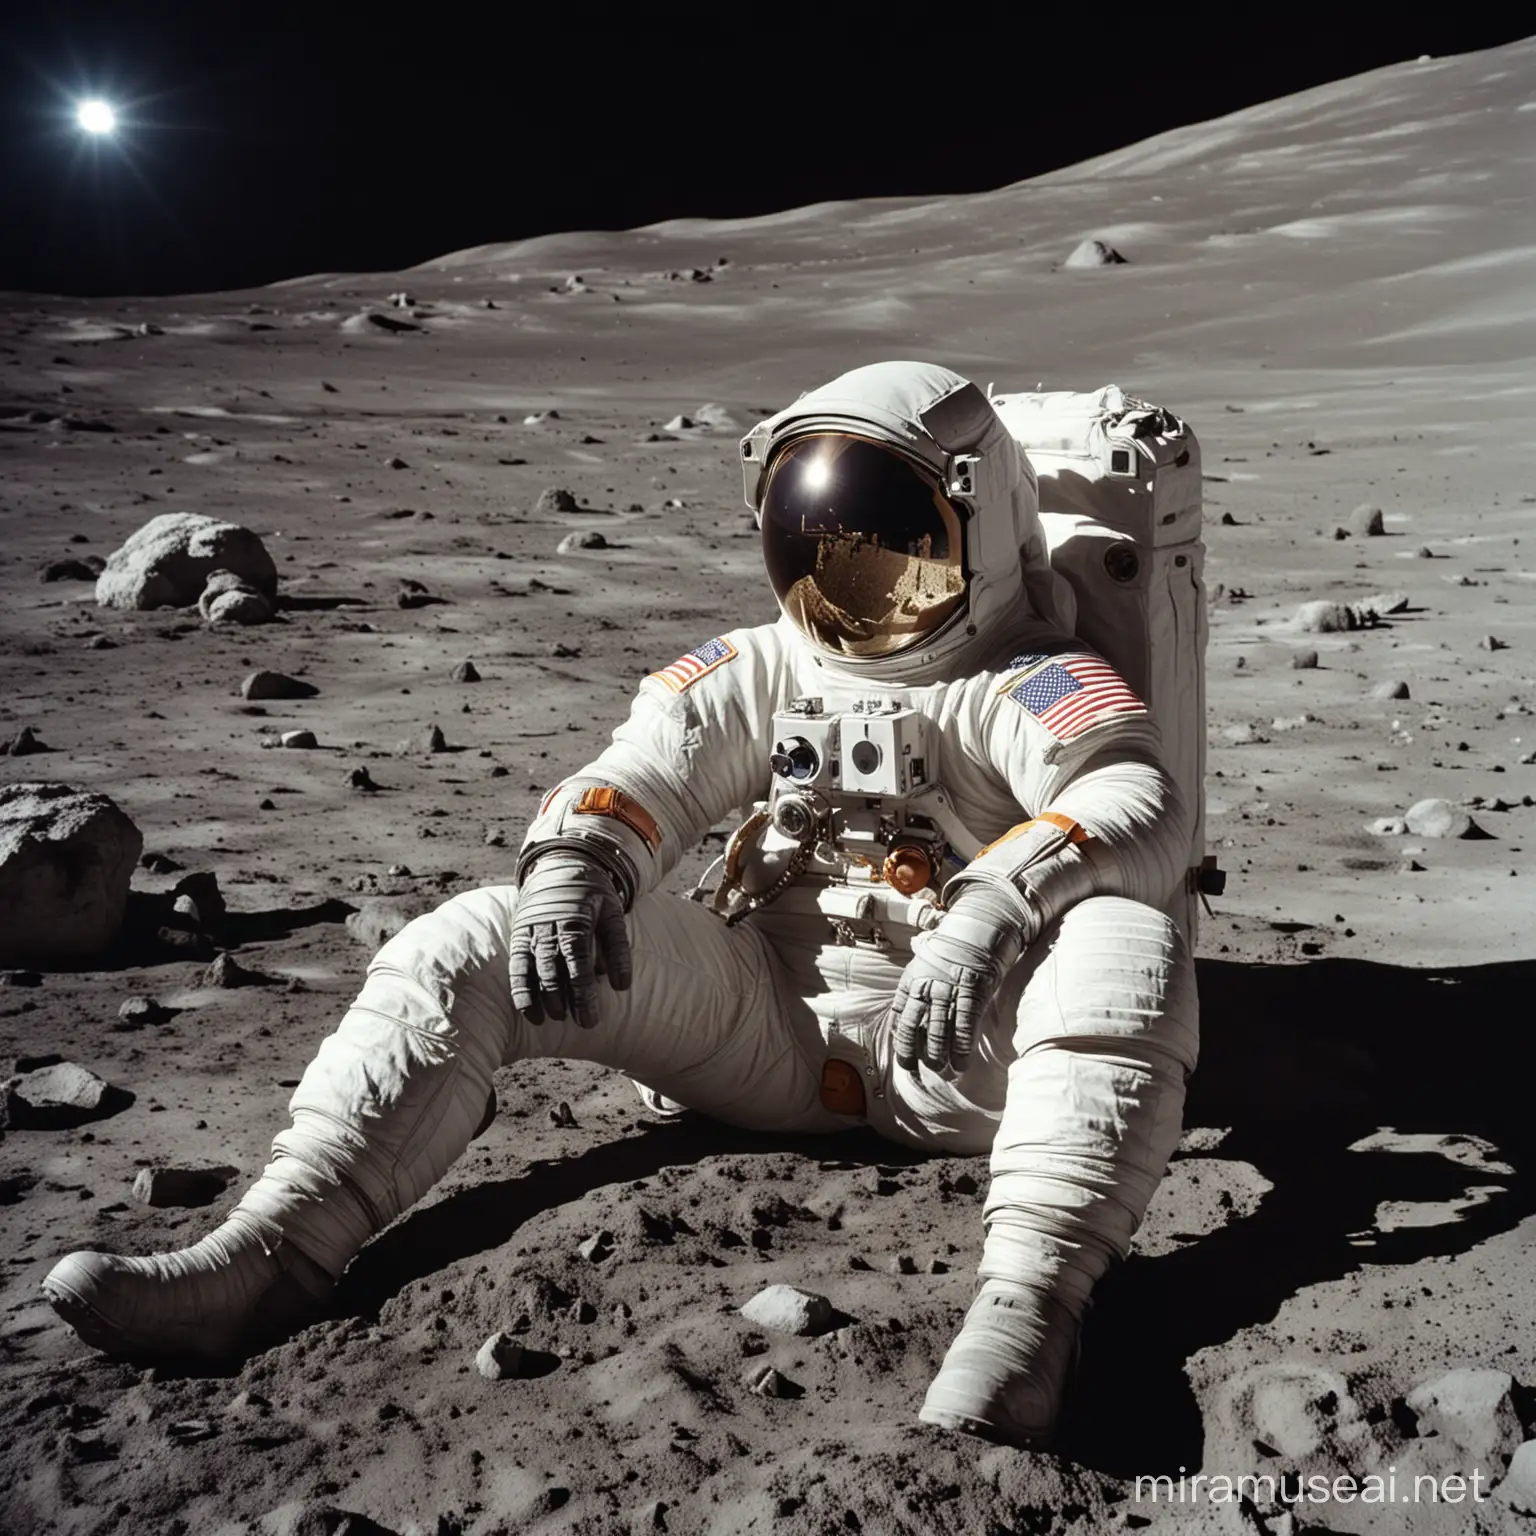 An astronaut sits on the moon in a spacesuit and calls
